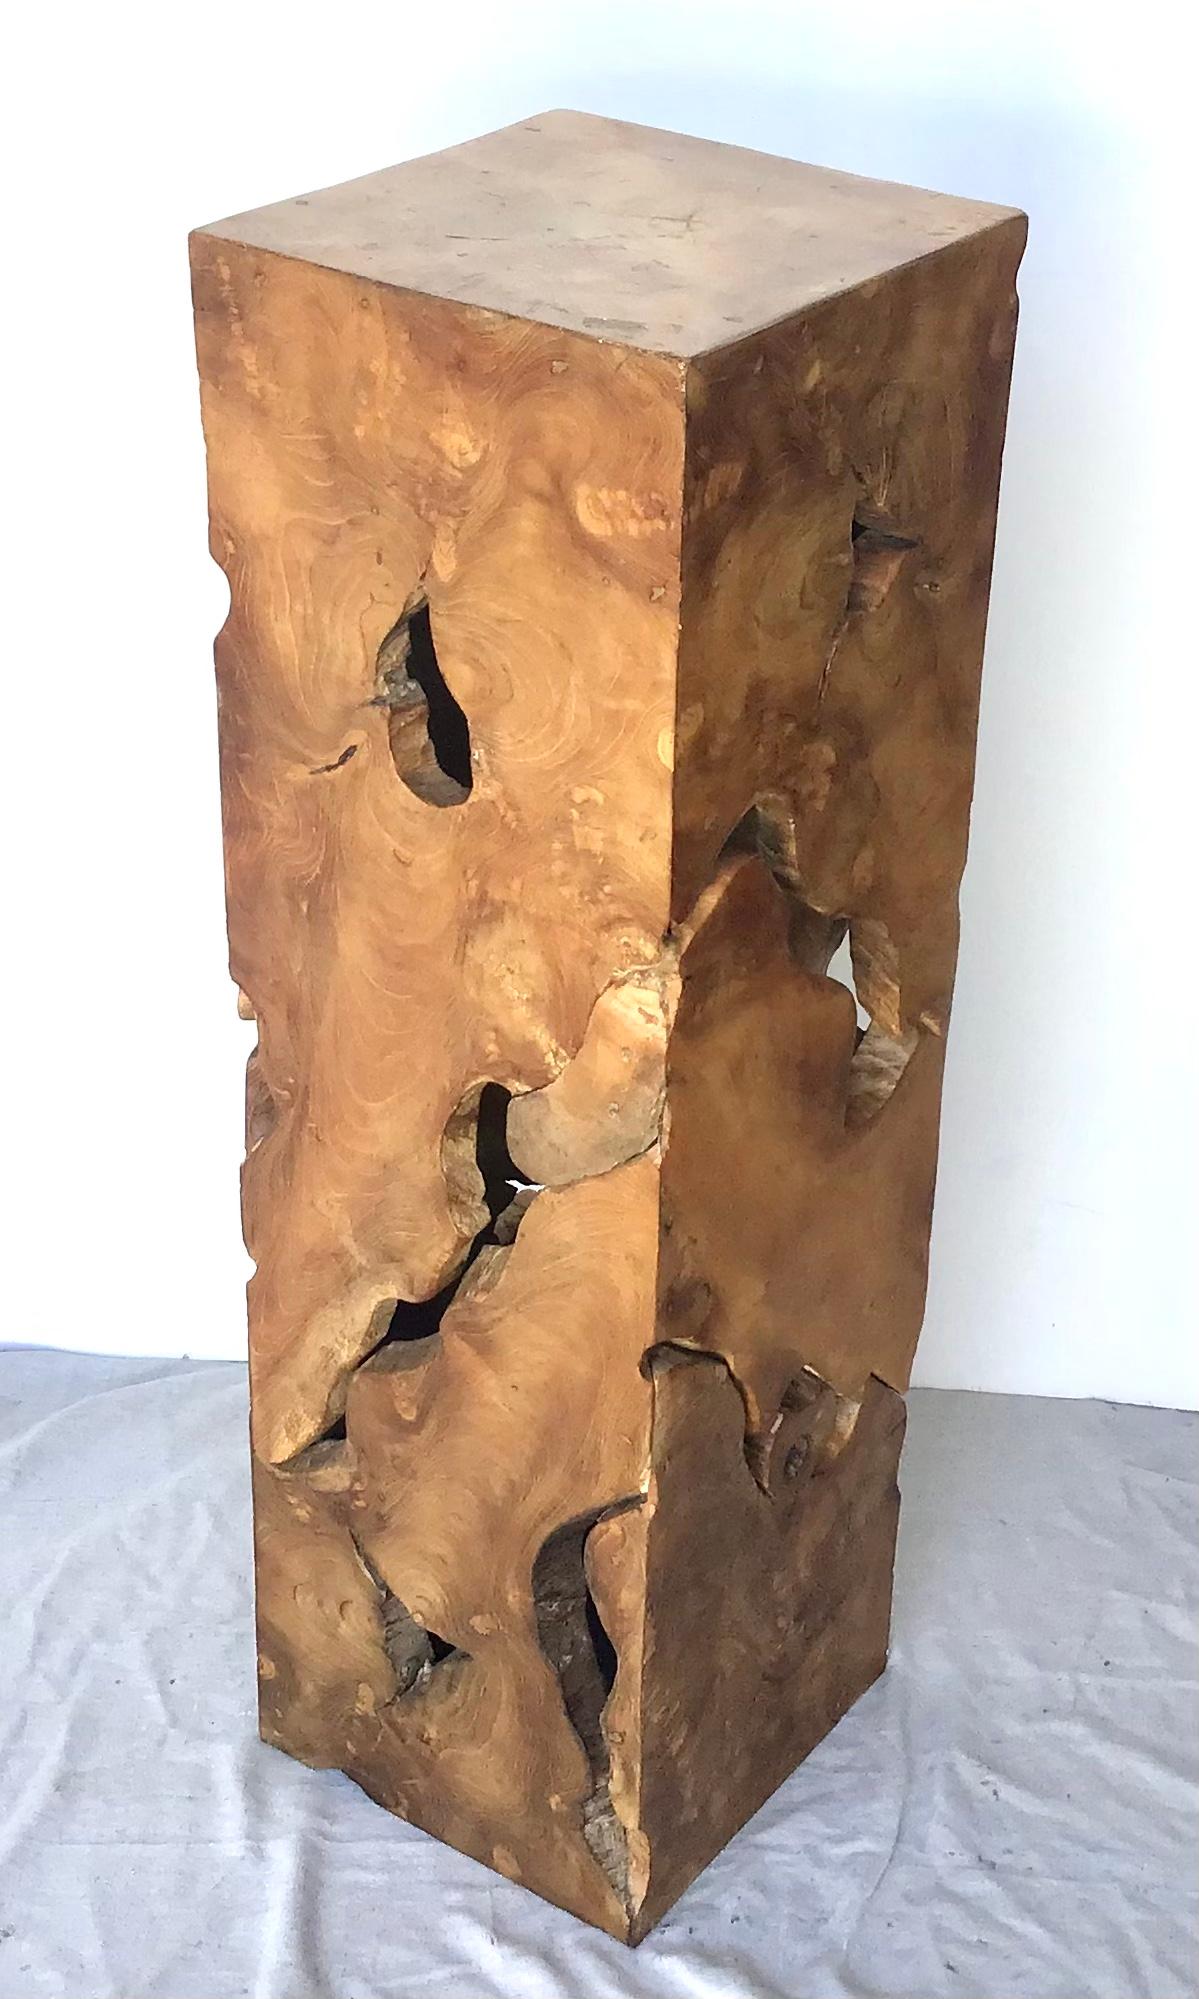 Nice burled wood column that can be used as a table or to display a sculpture. This rustic yet chic pedestal has been artisan created with a live-edge burl wood, with wonderful knobby bits, voids, and organic movement to it. This burl wood pedestal